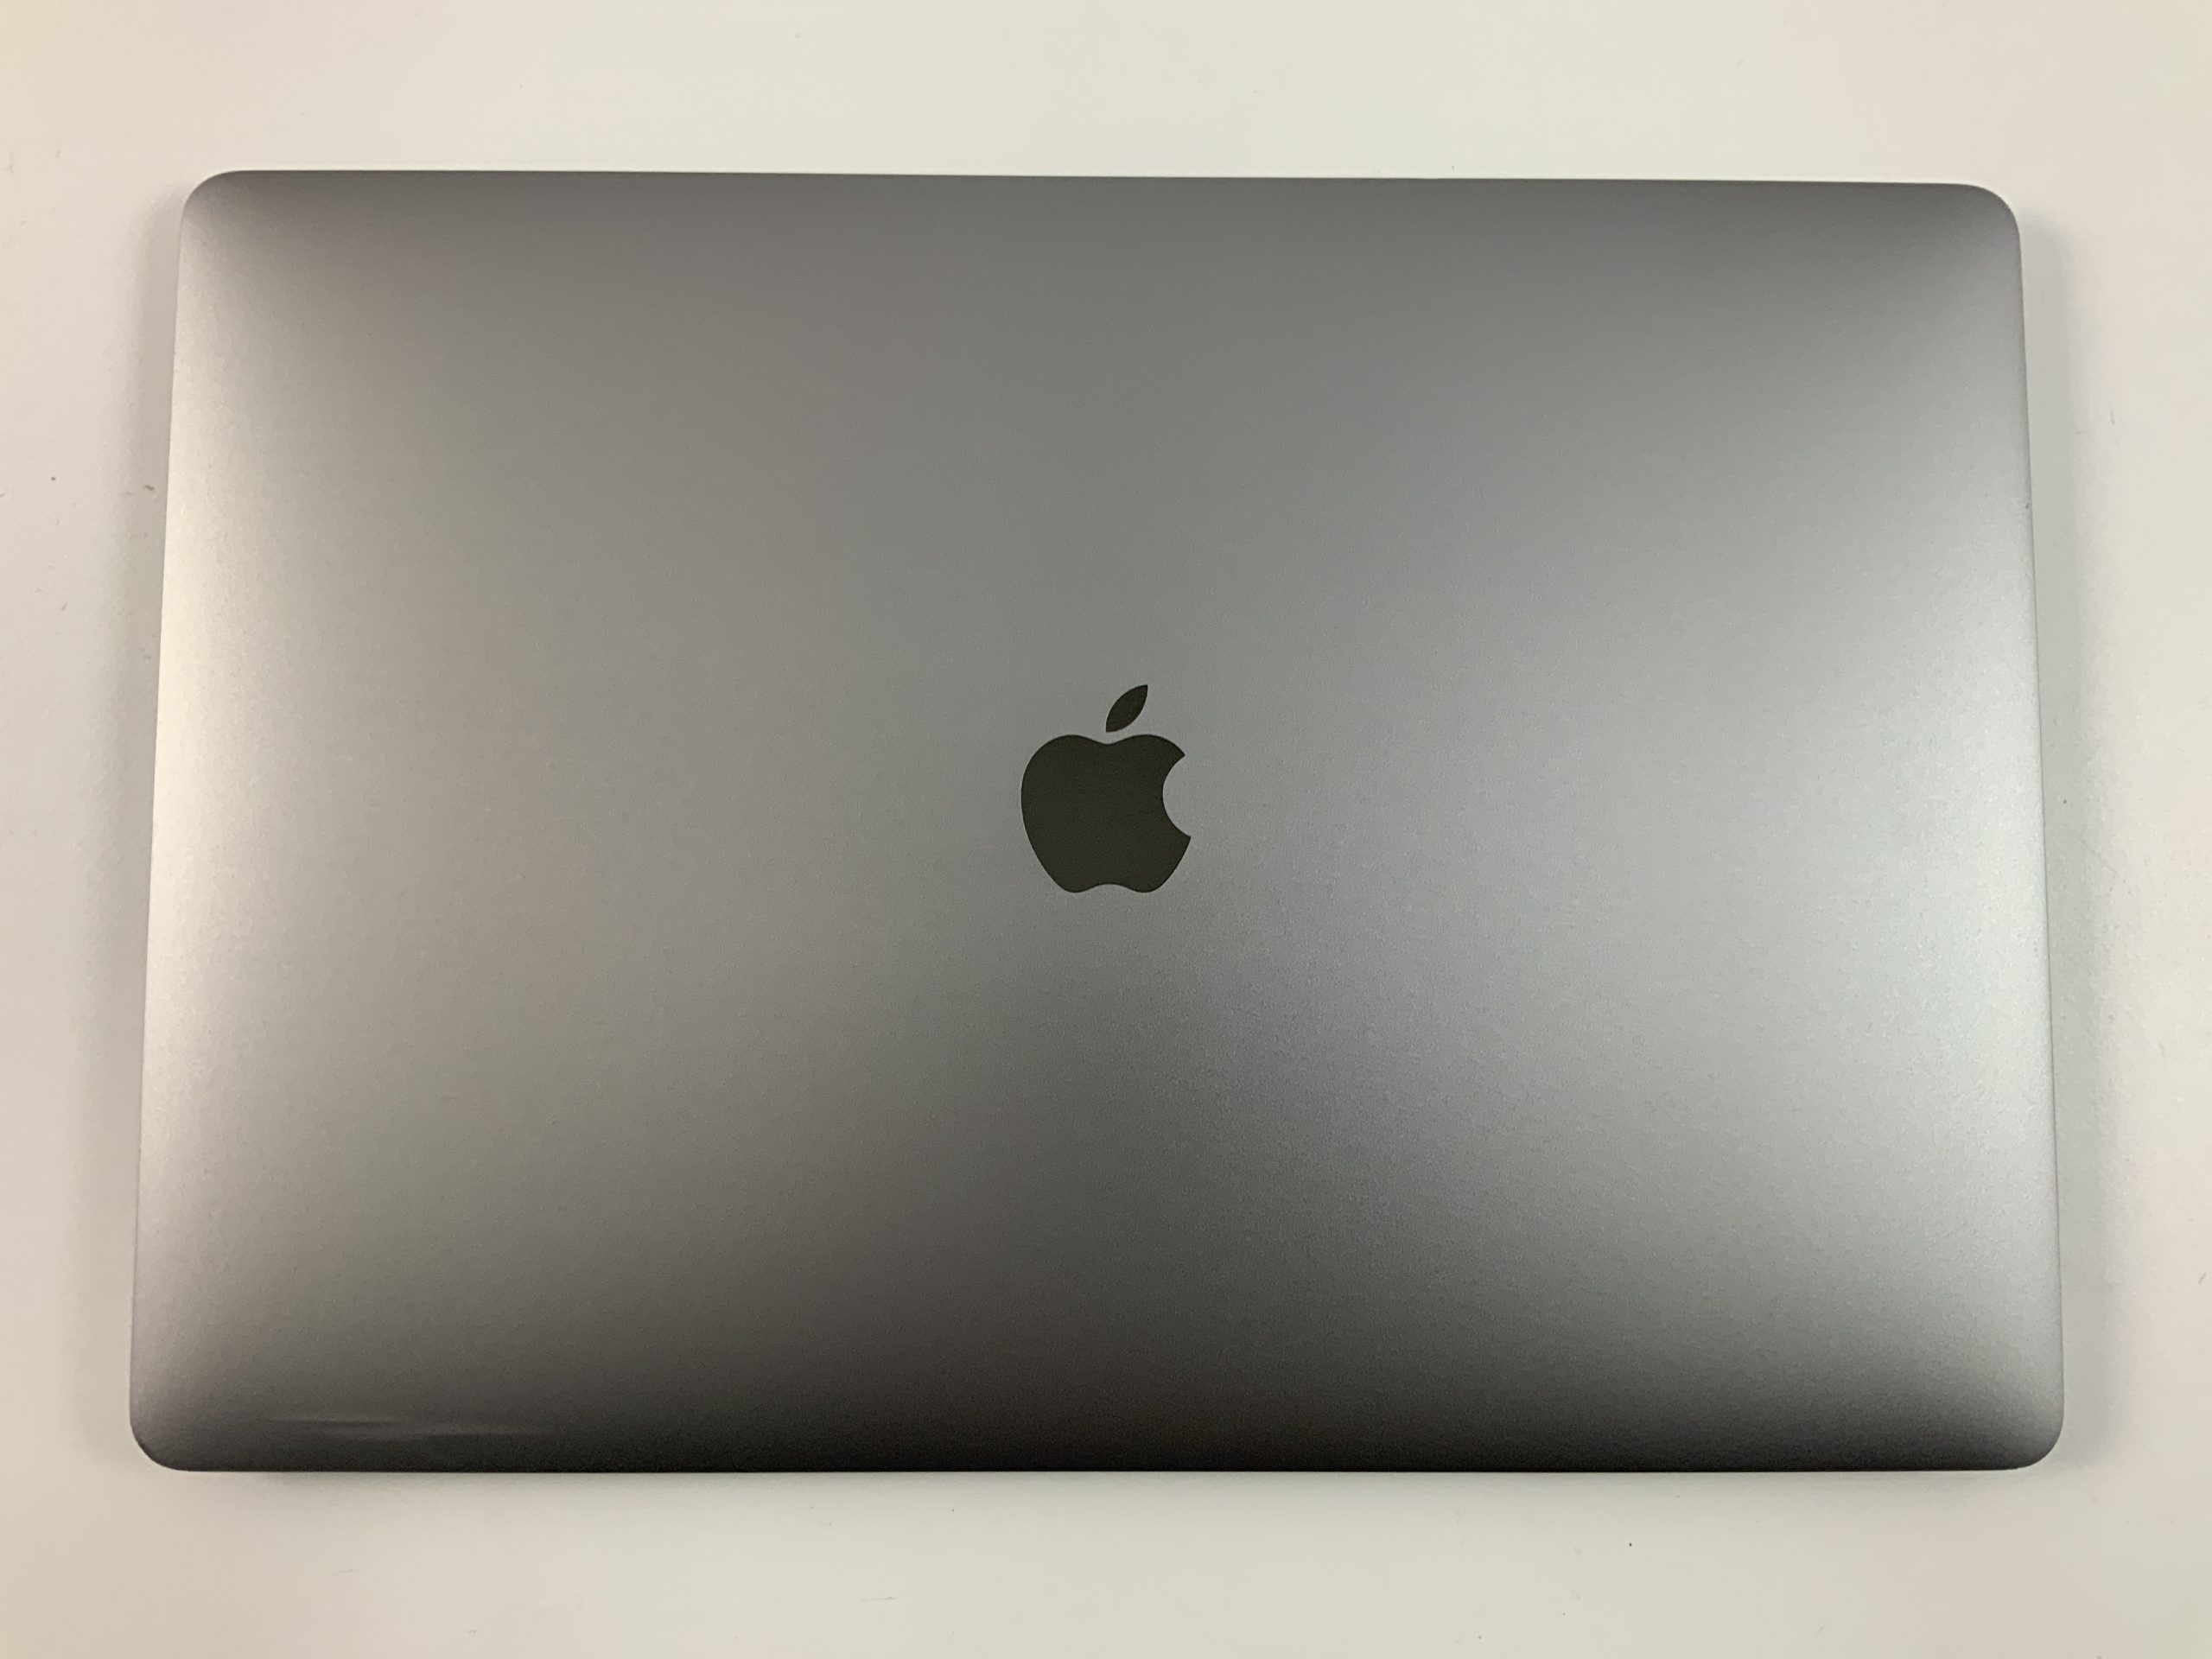 MacBook Pro 15" Touch Bar Mid 2018 (Intel 6-Core i7 2.2 GHz 16 GB RAM 512 GB SSD), Space Gray, Intel 6-Core i7 2.2 GHz, 16 GB RAM, 512 GB SSD, Afbeelding 3